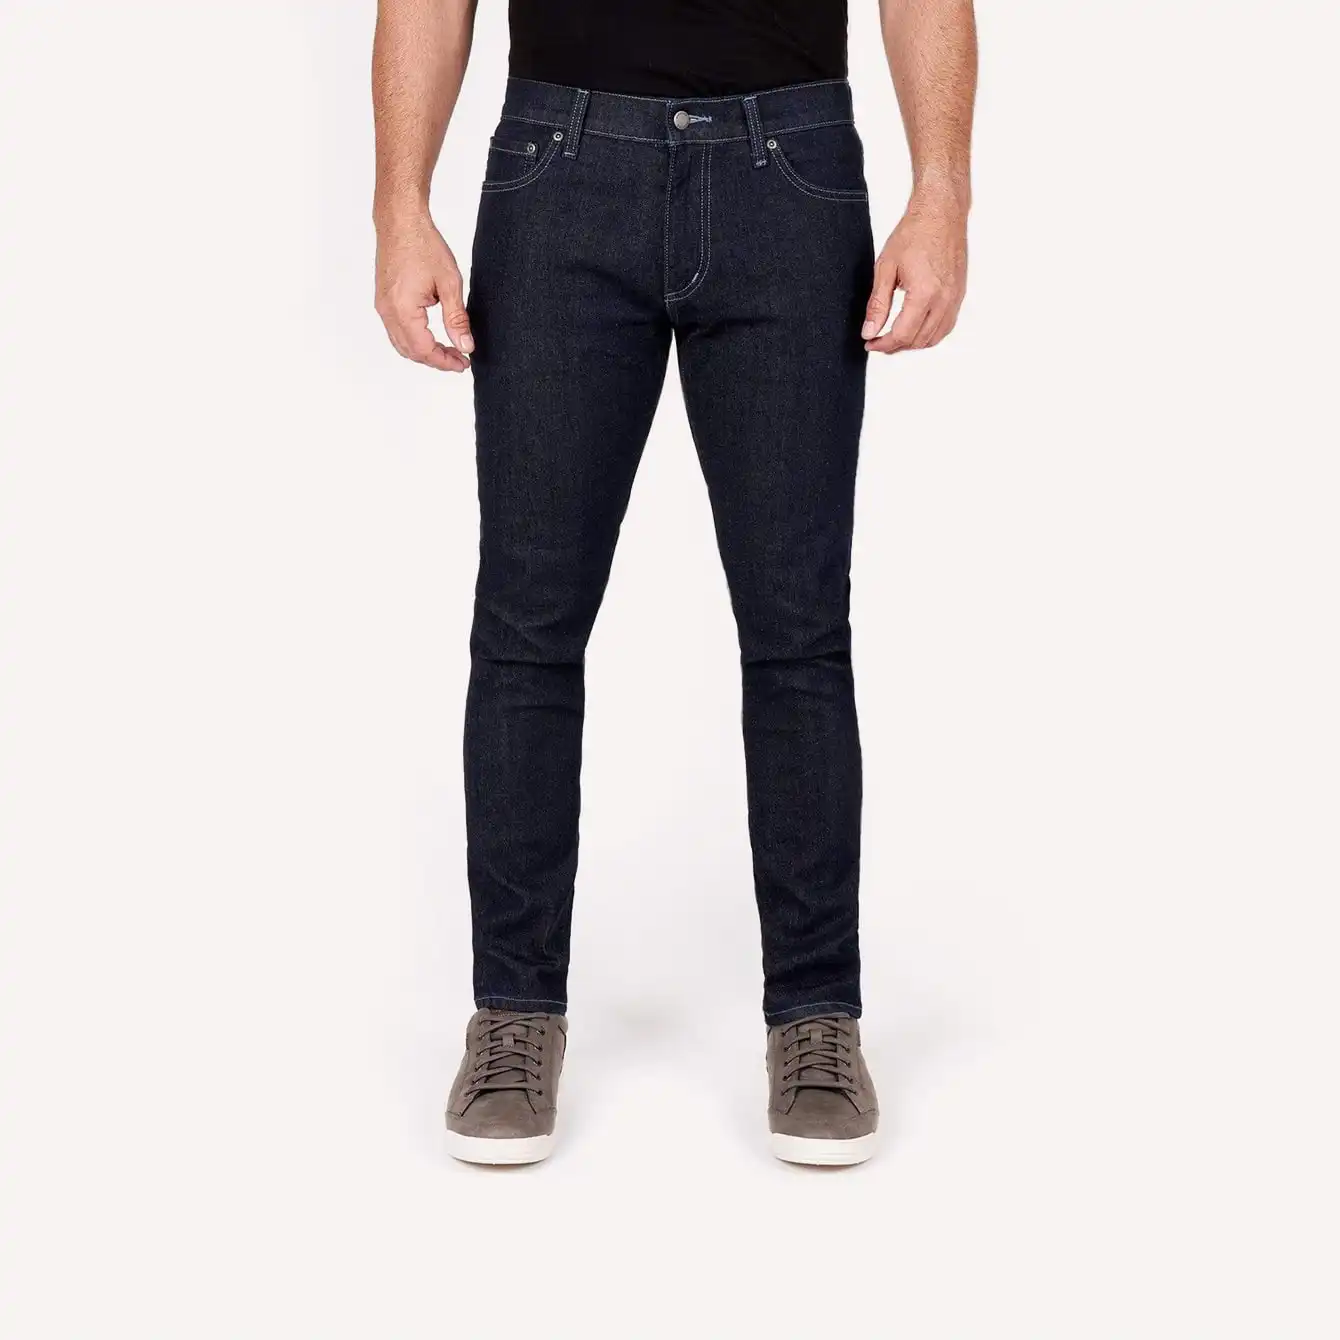 Where to buy 28 inseam Jeans for Men: Clothes for Short Guys